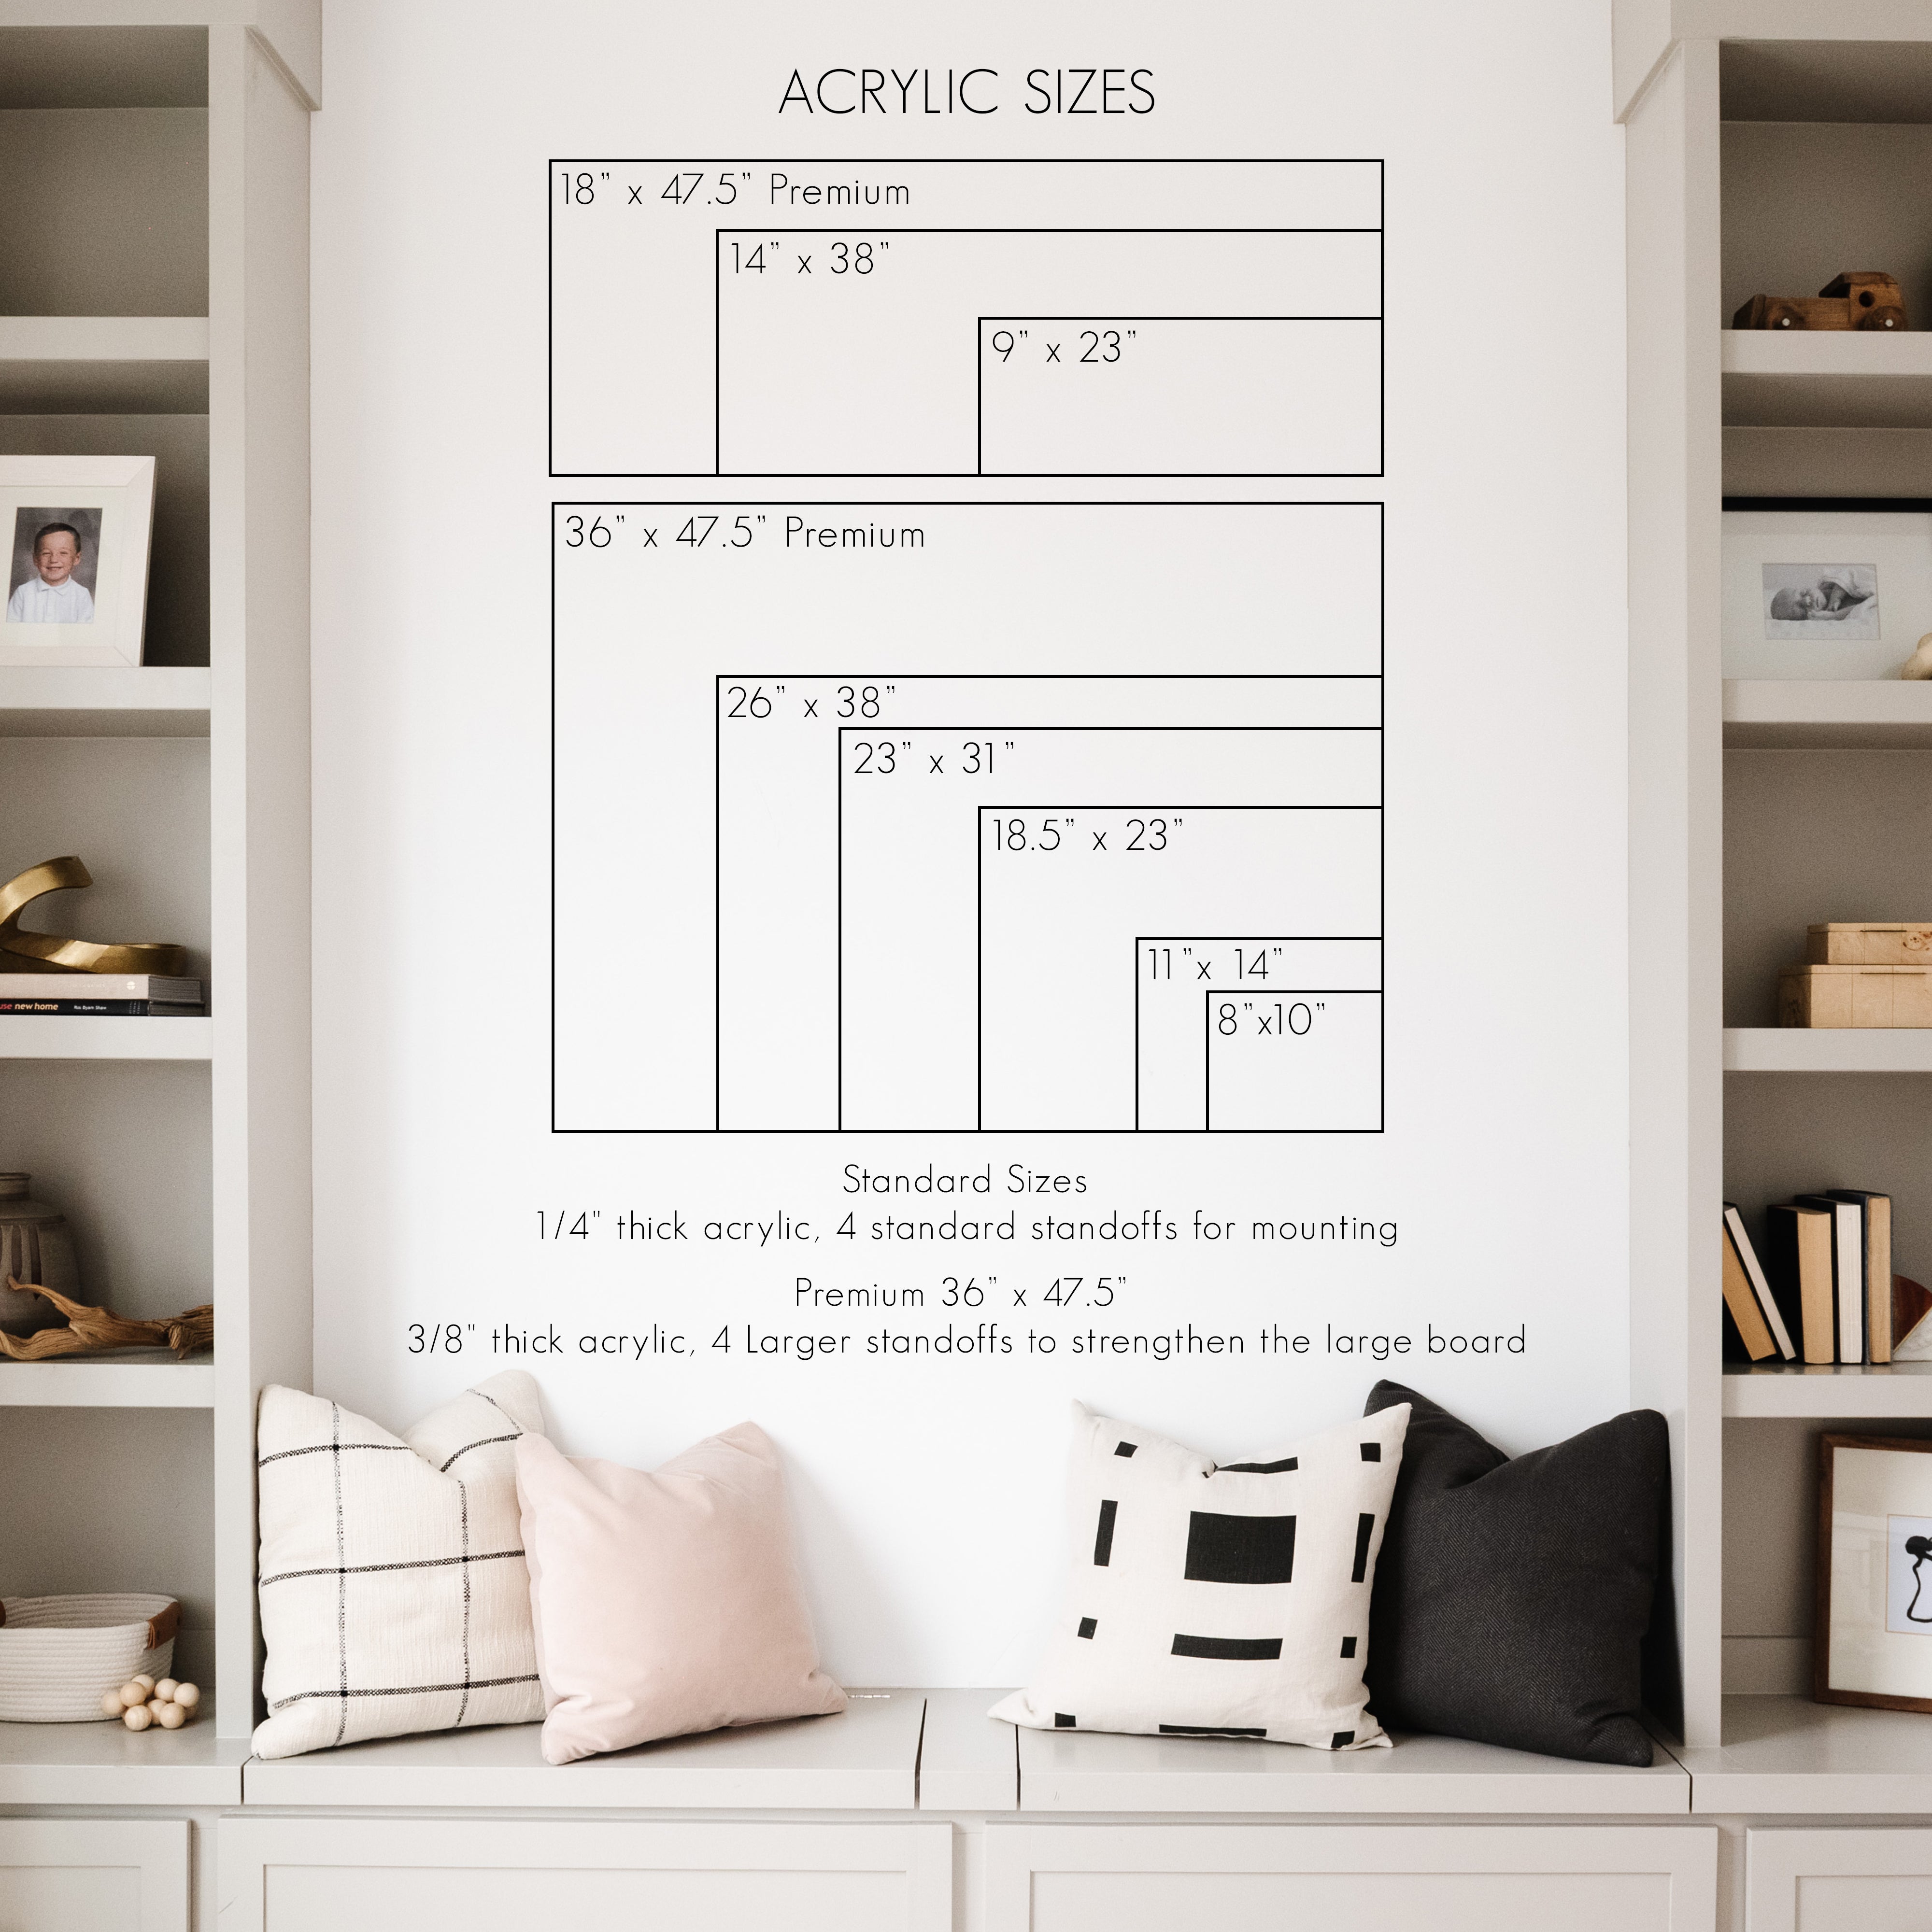 Monthly Frosted Acrylic Calendar + 5 Sections | Horizontal Madi